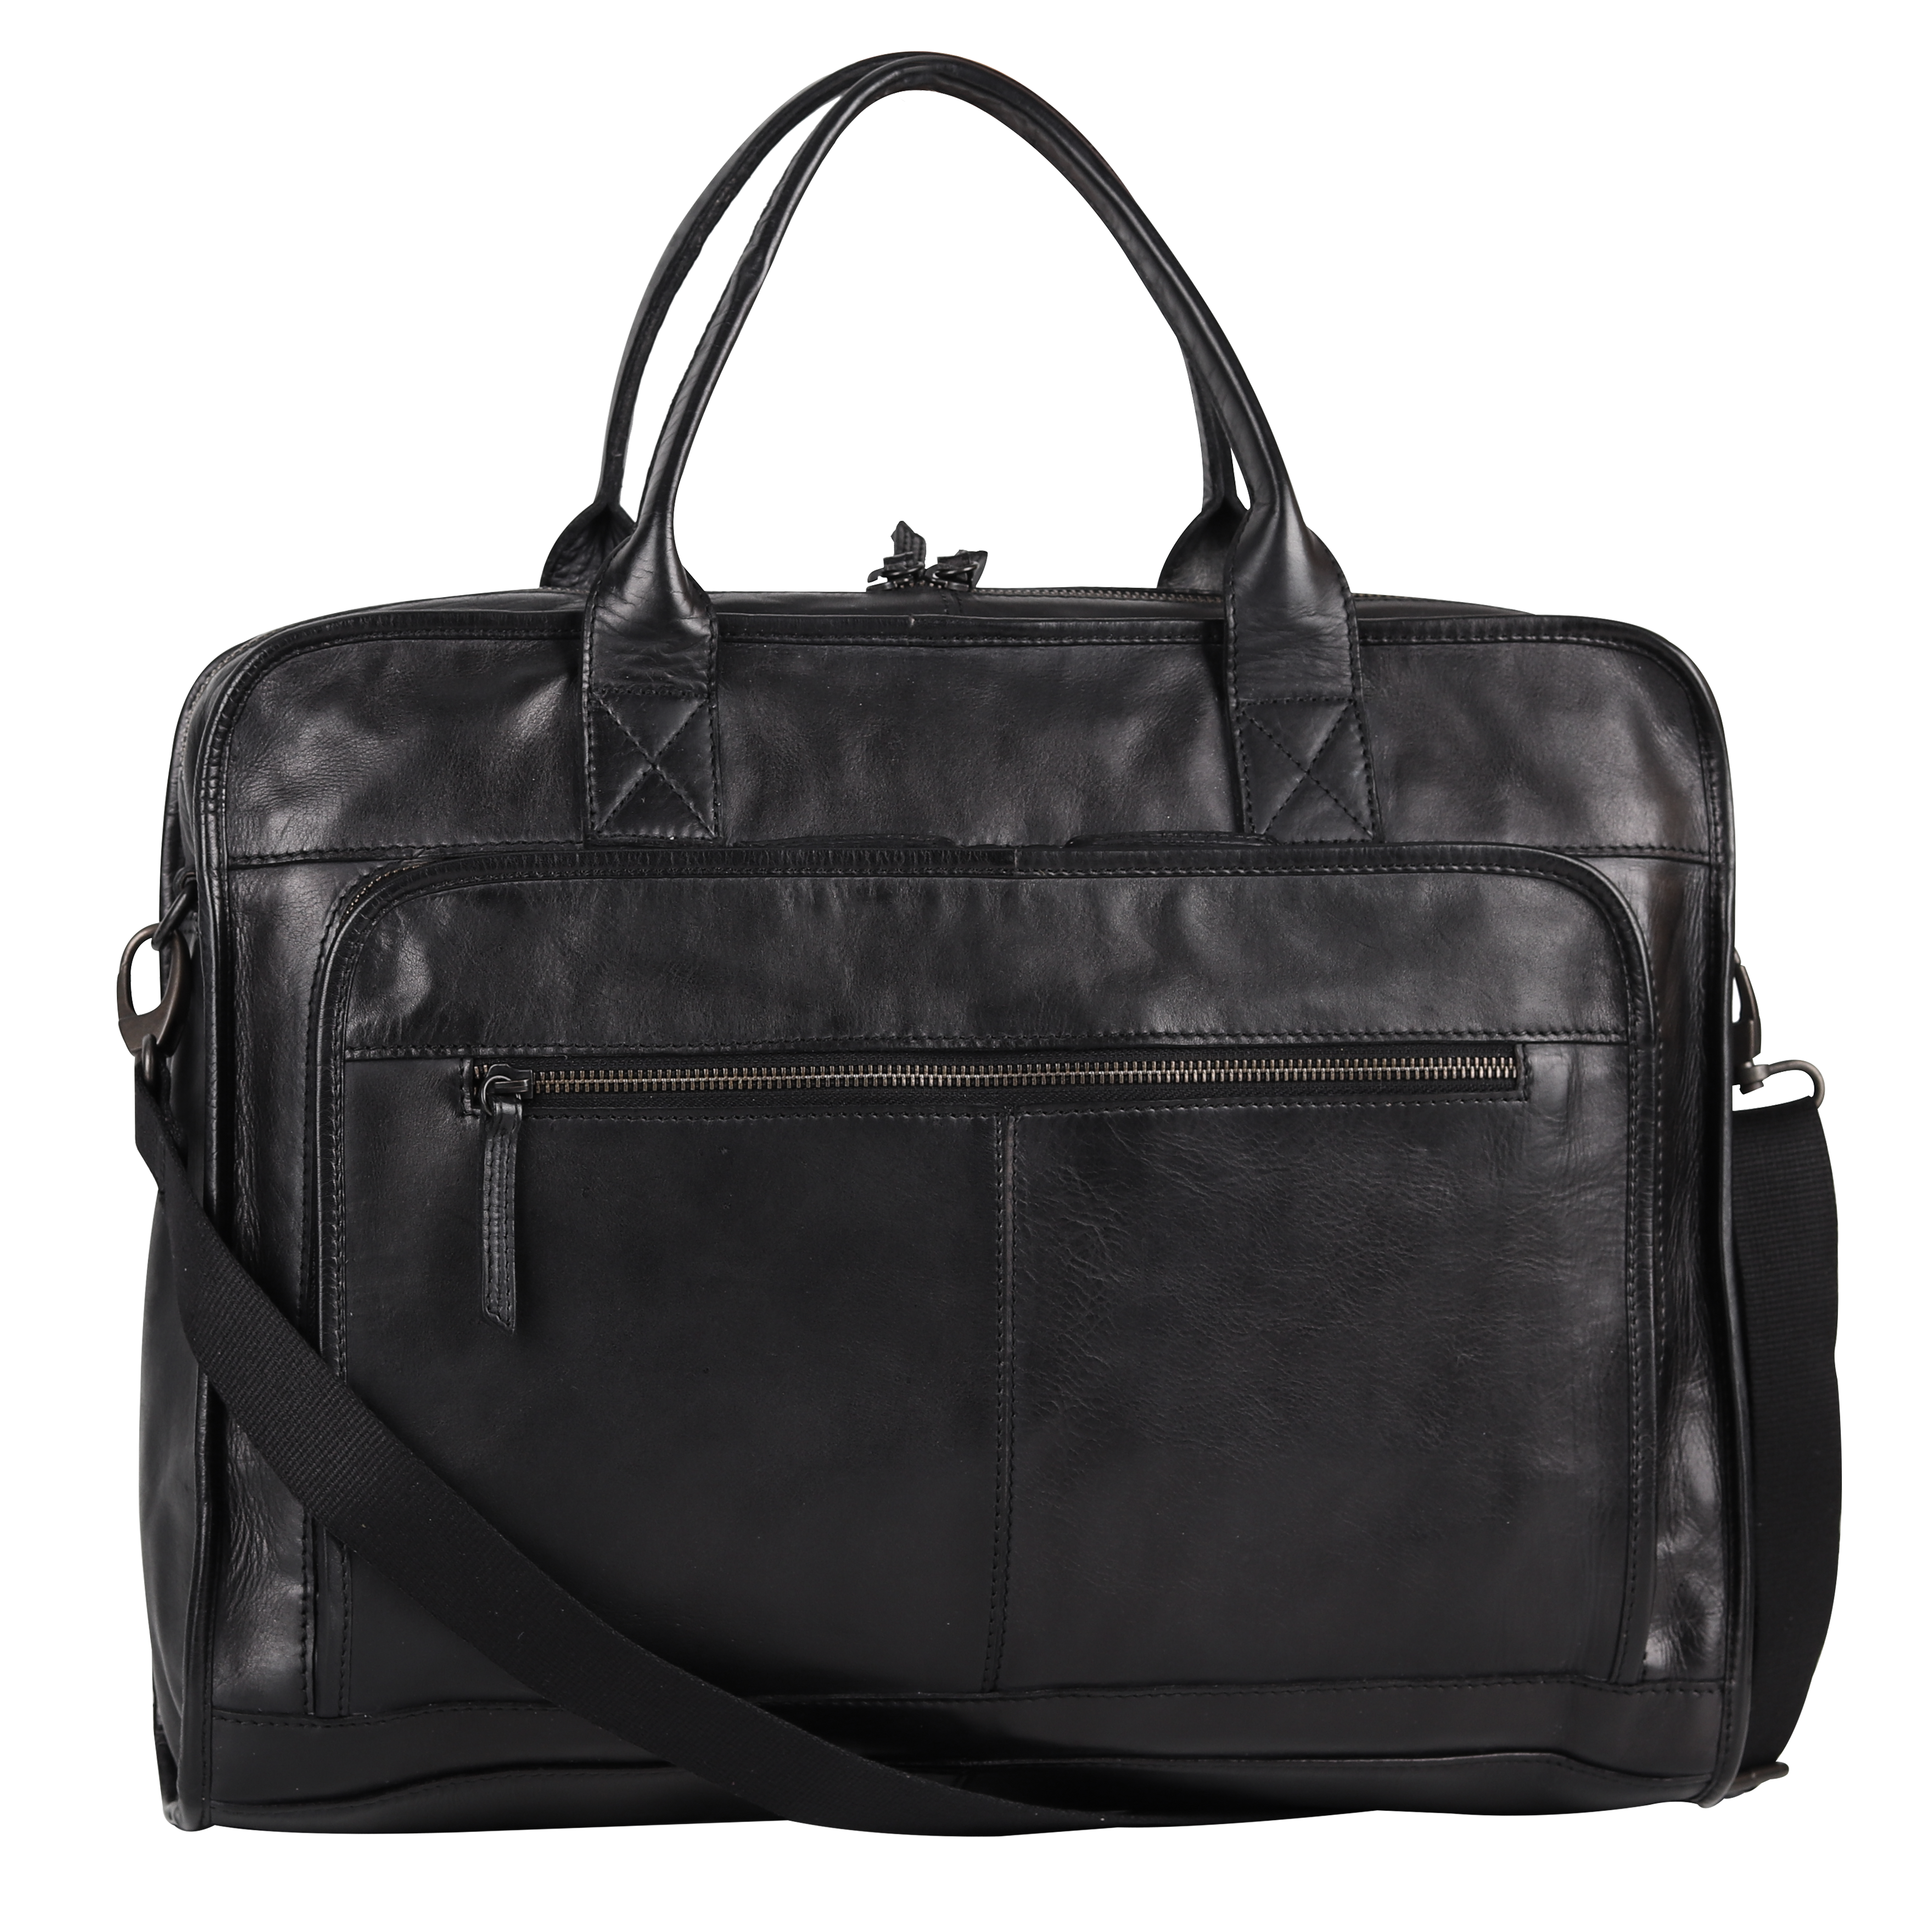 BOL/Open Road Two Handle Messenger Laptop Leather Bag